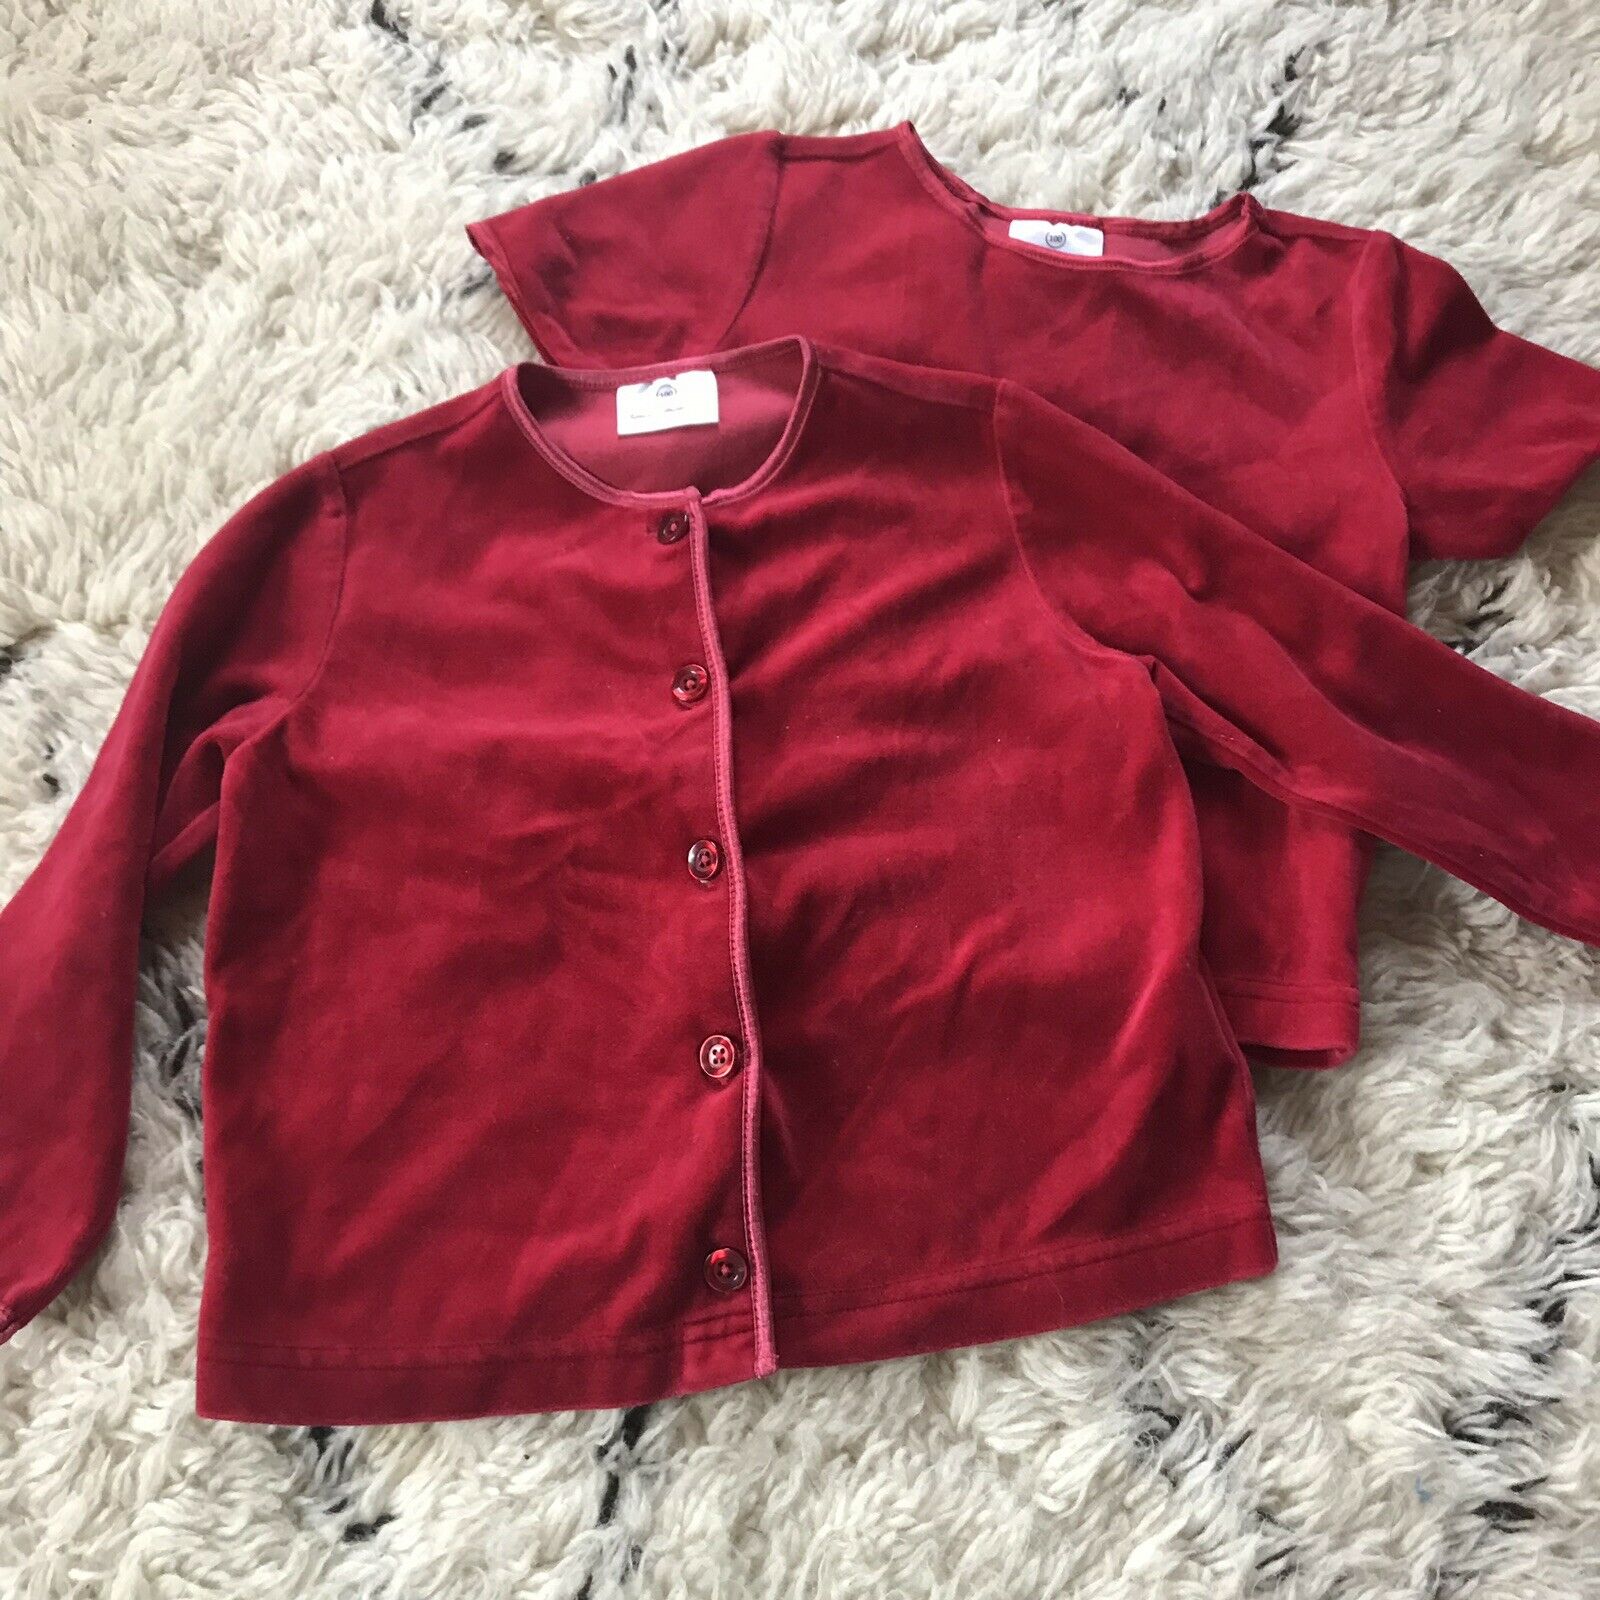 Hanna Andersson 100 Red Velour Sweater Set Excellent Short Sleeve Tee & Sweater